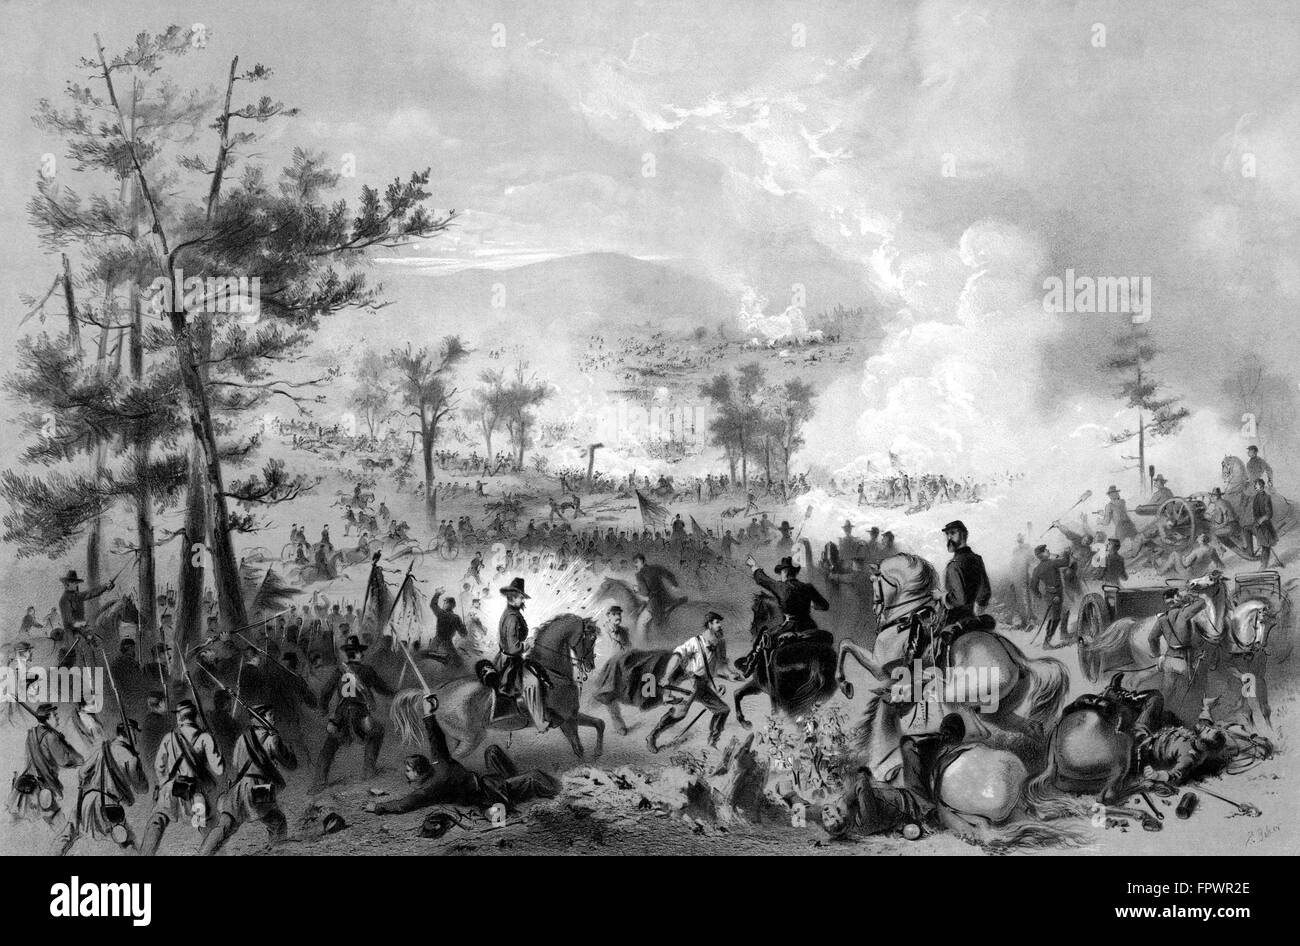 Vintage Civil War print of the Battle of Gettysburg. The famous battle took place in early July 1863 and resulted in the largest Stock Photo